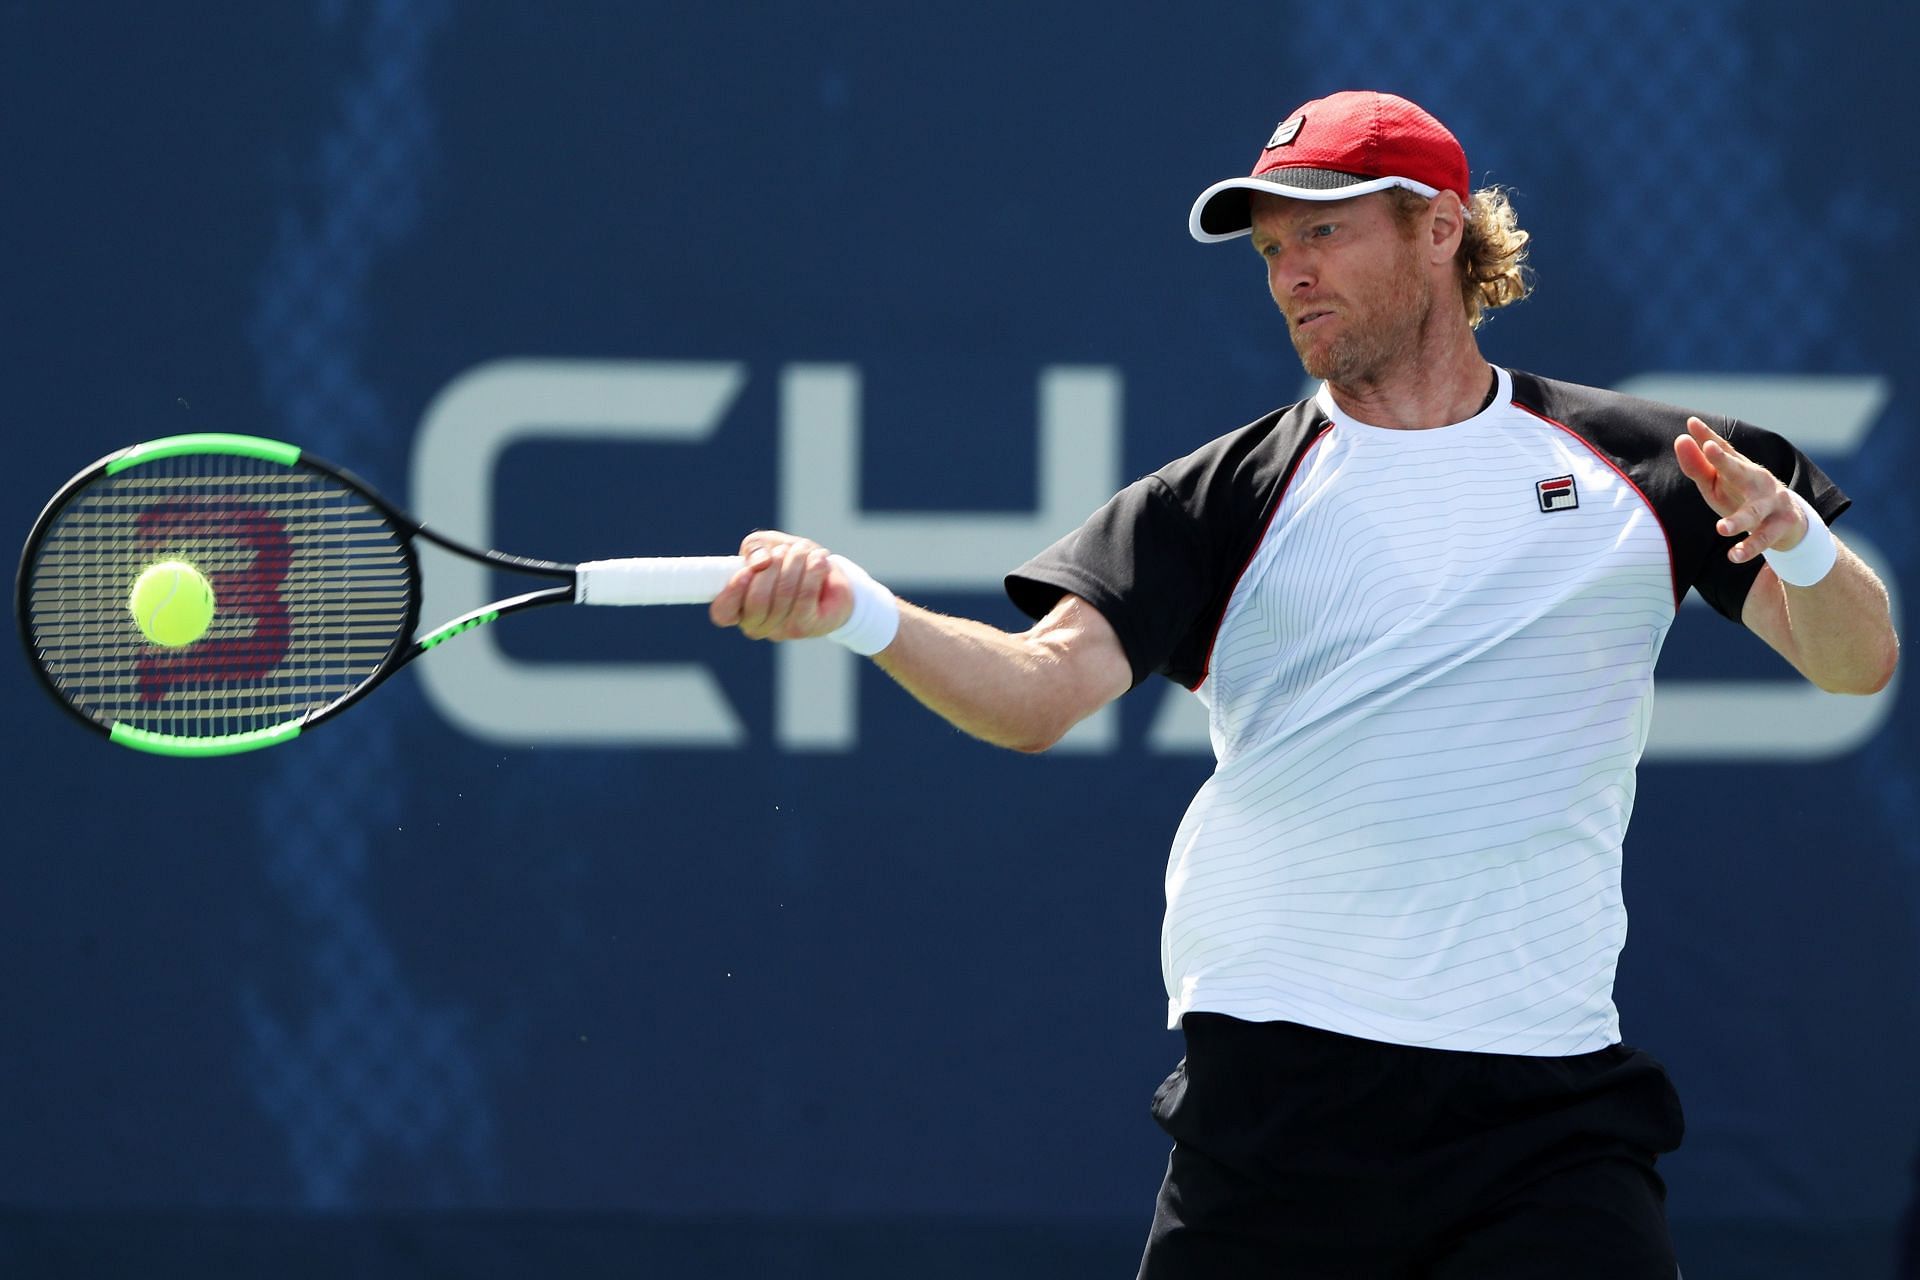 Dmitry Tursunov in action at the US Open 2017